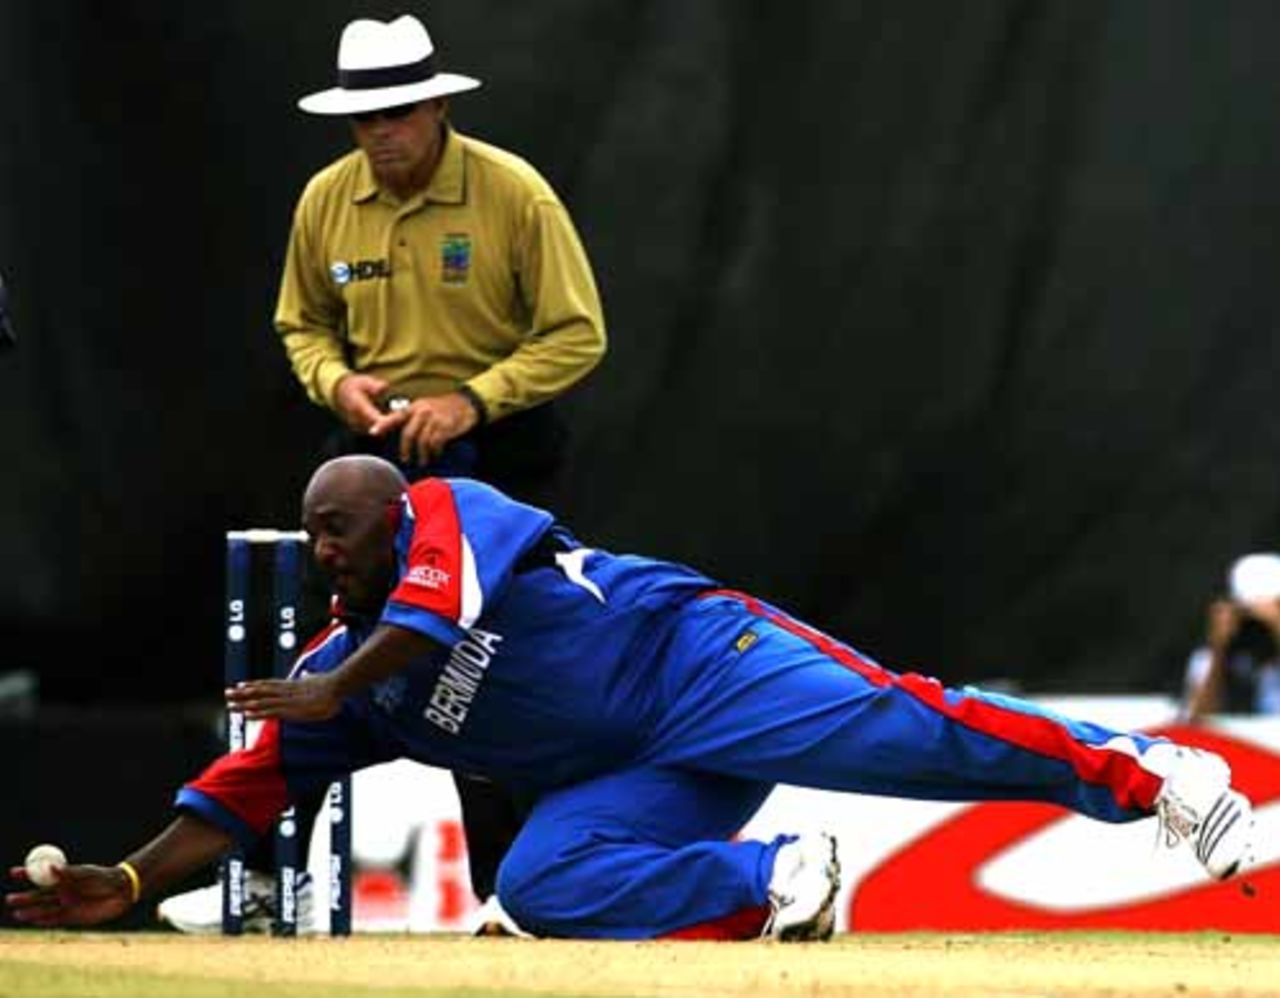 Dwayne Leverock, who dropped two catches, tries and fails to field off his own bowling, Bermuda v Sri Lanka, Group B, Port of Spain, March 15, 2007